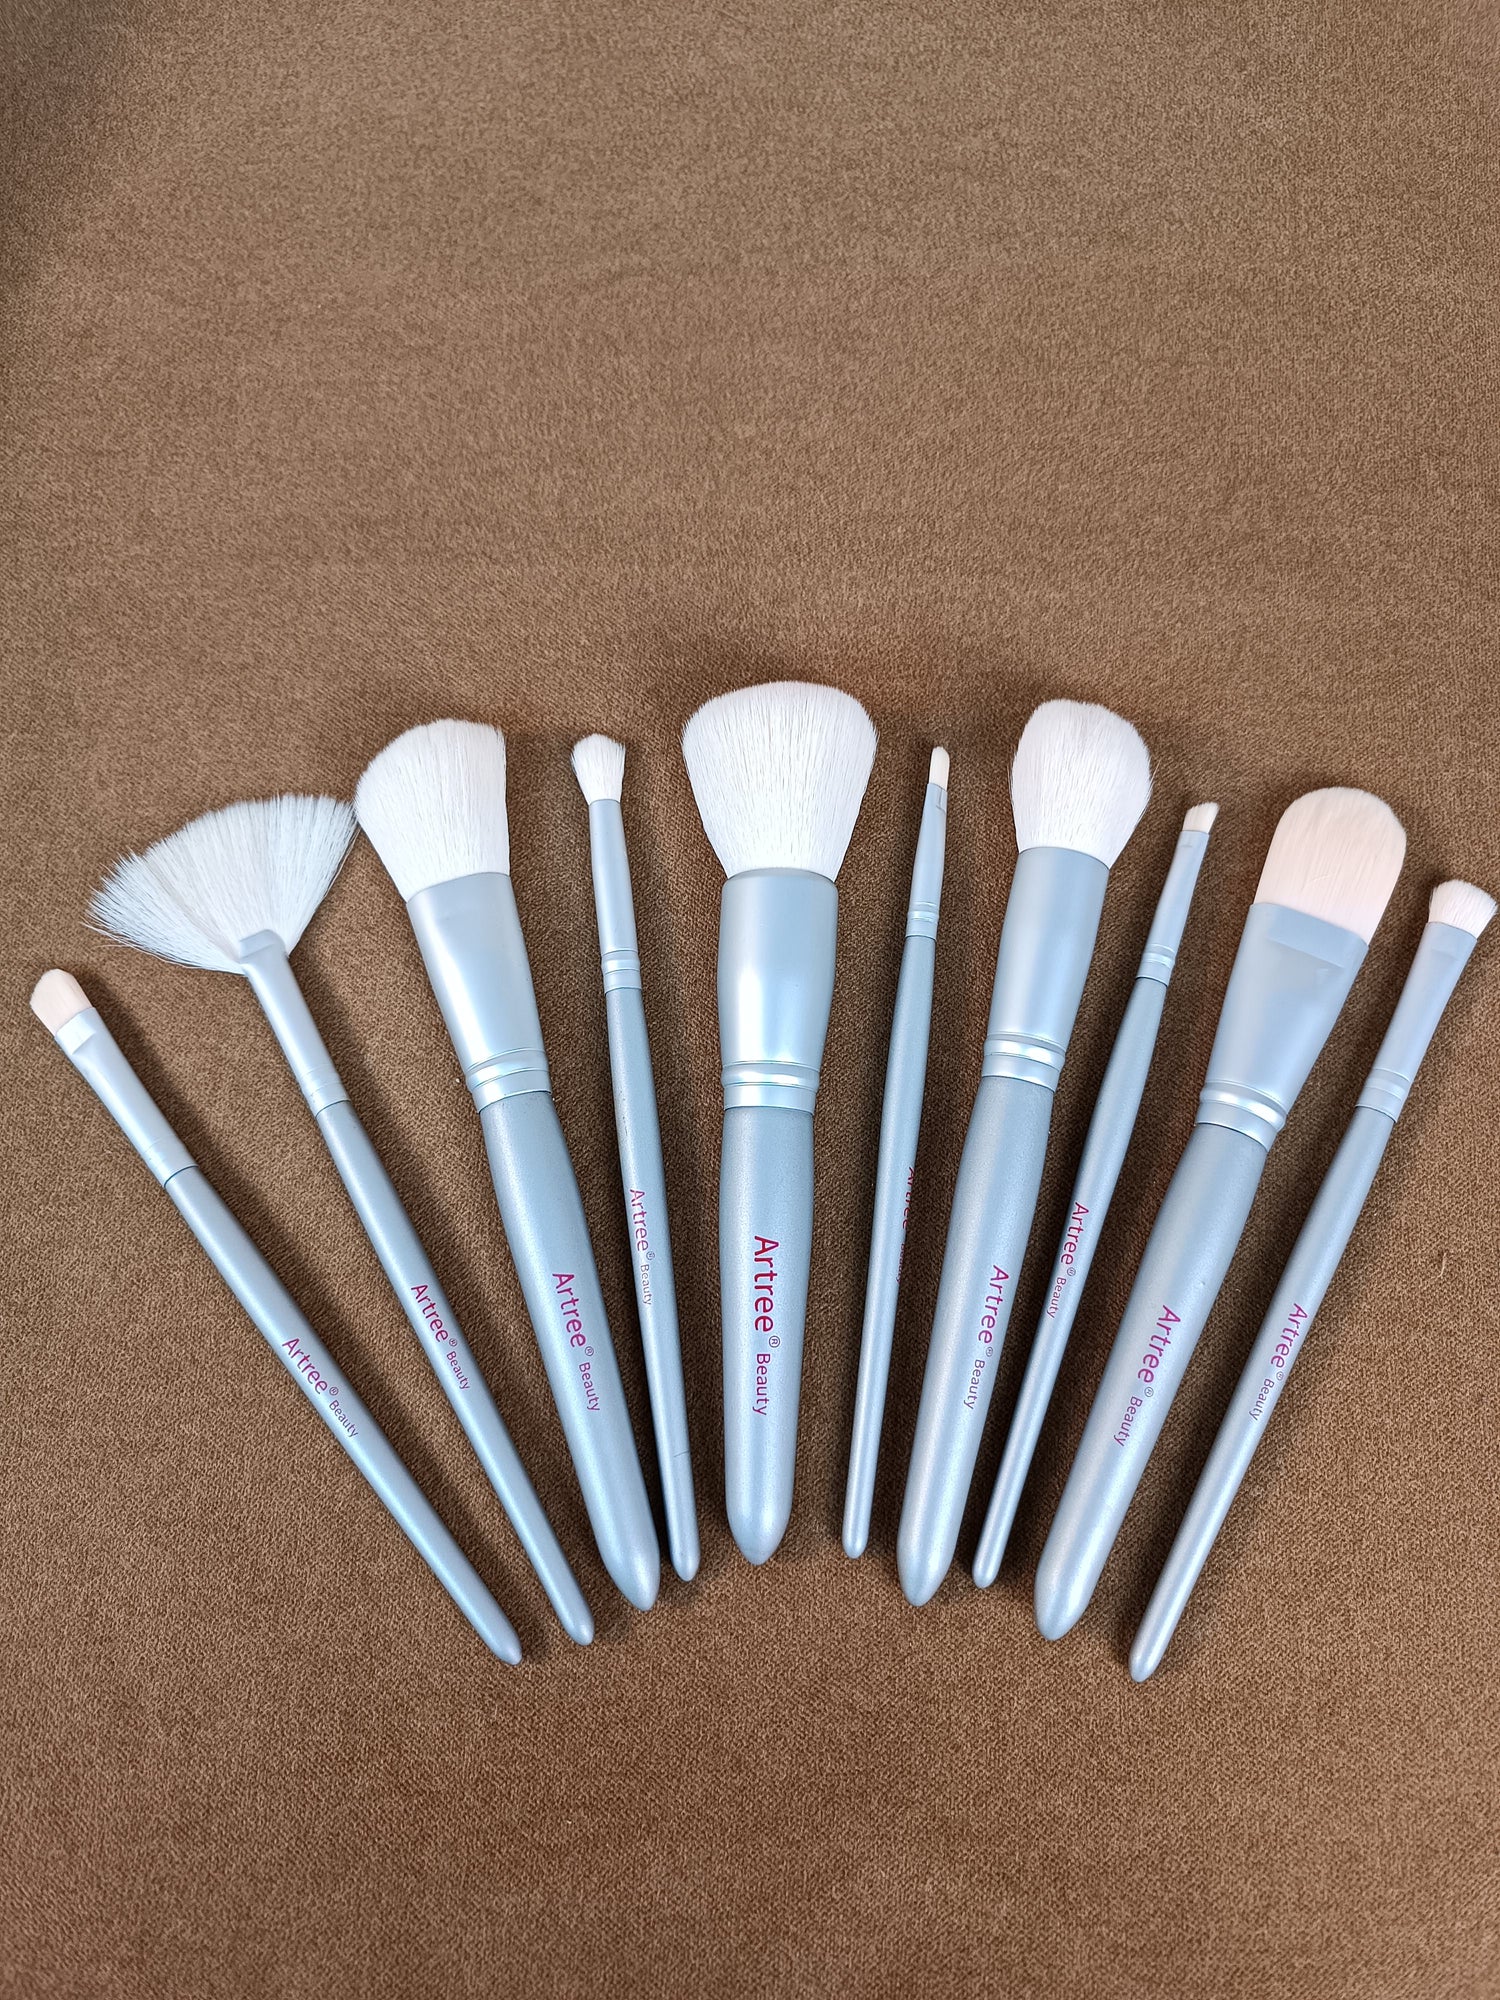 Artree beauty makeup brushes set 10pcs with pouch